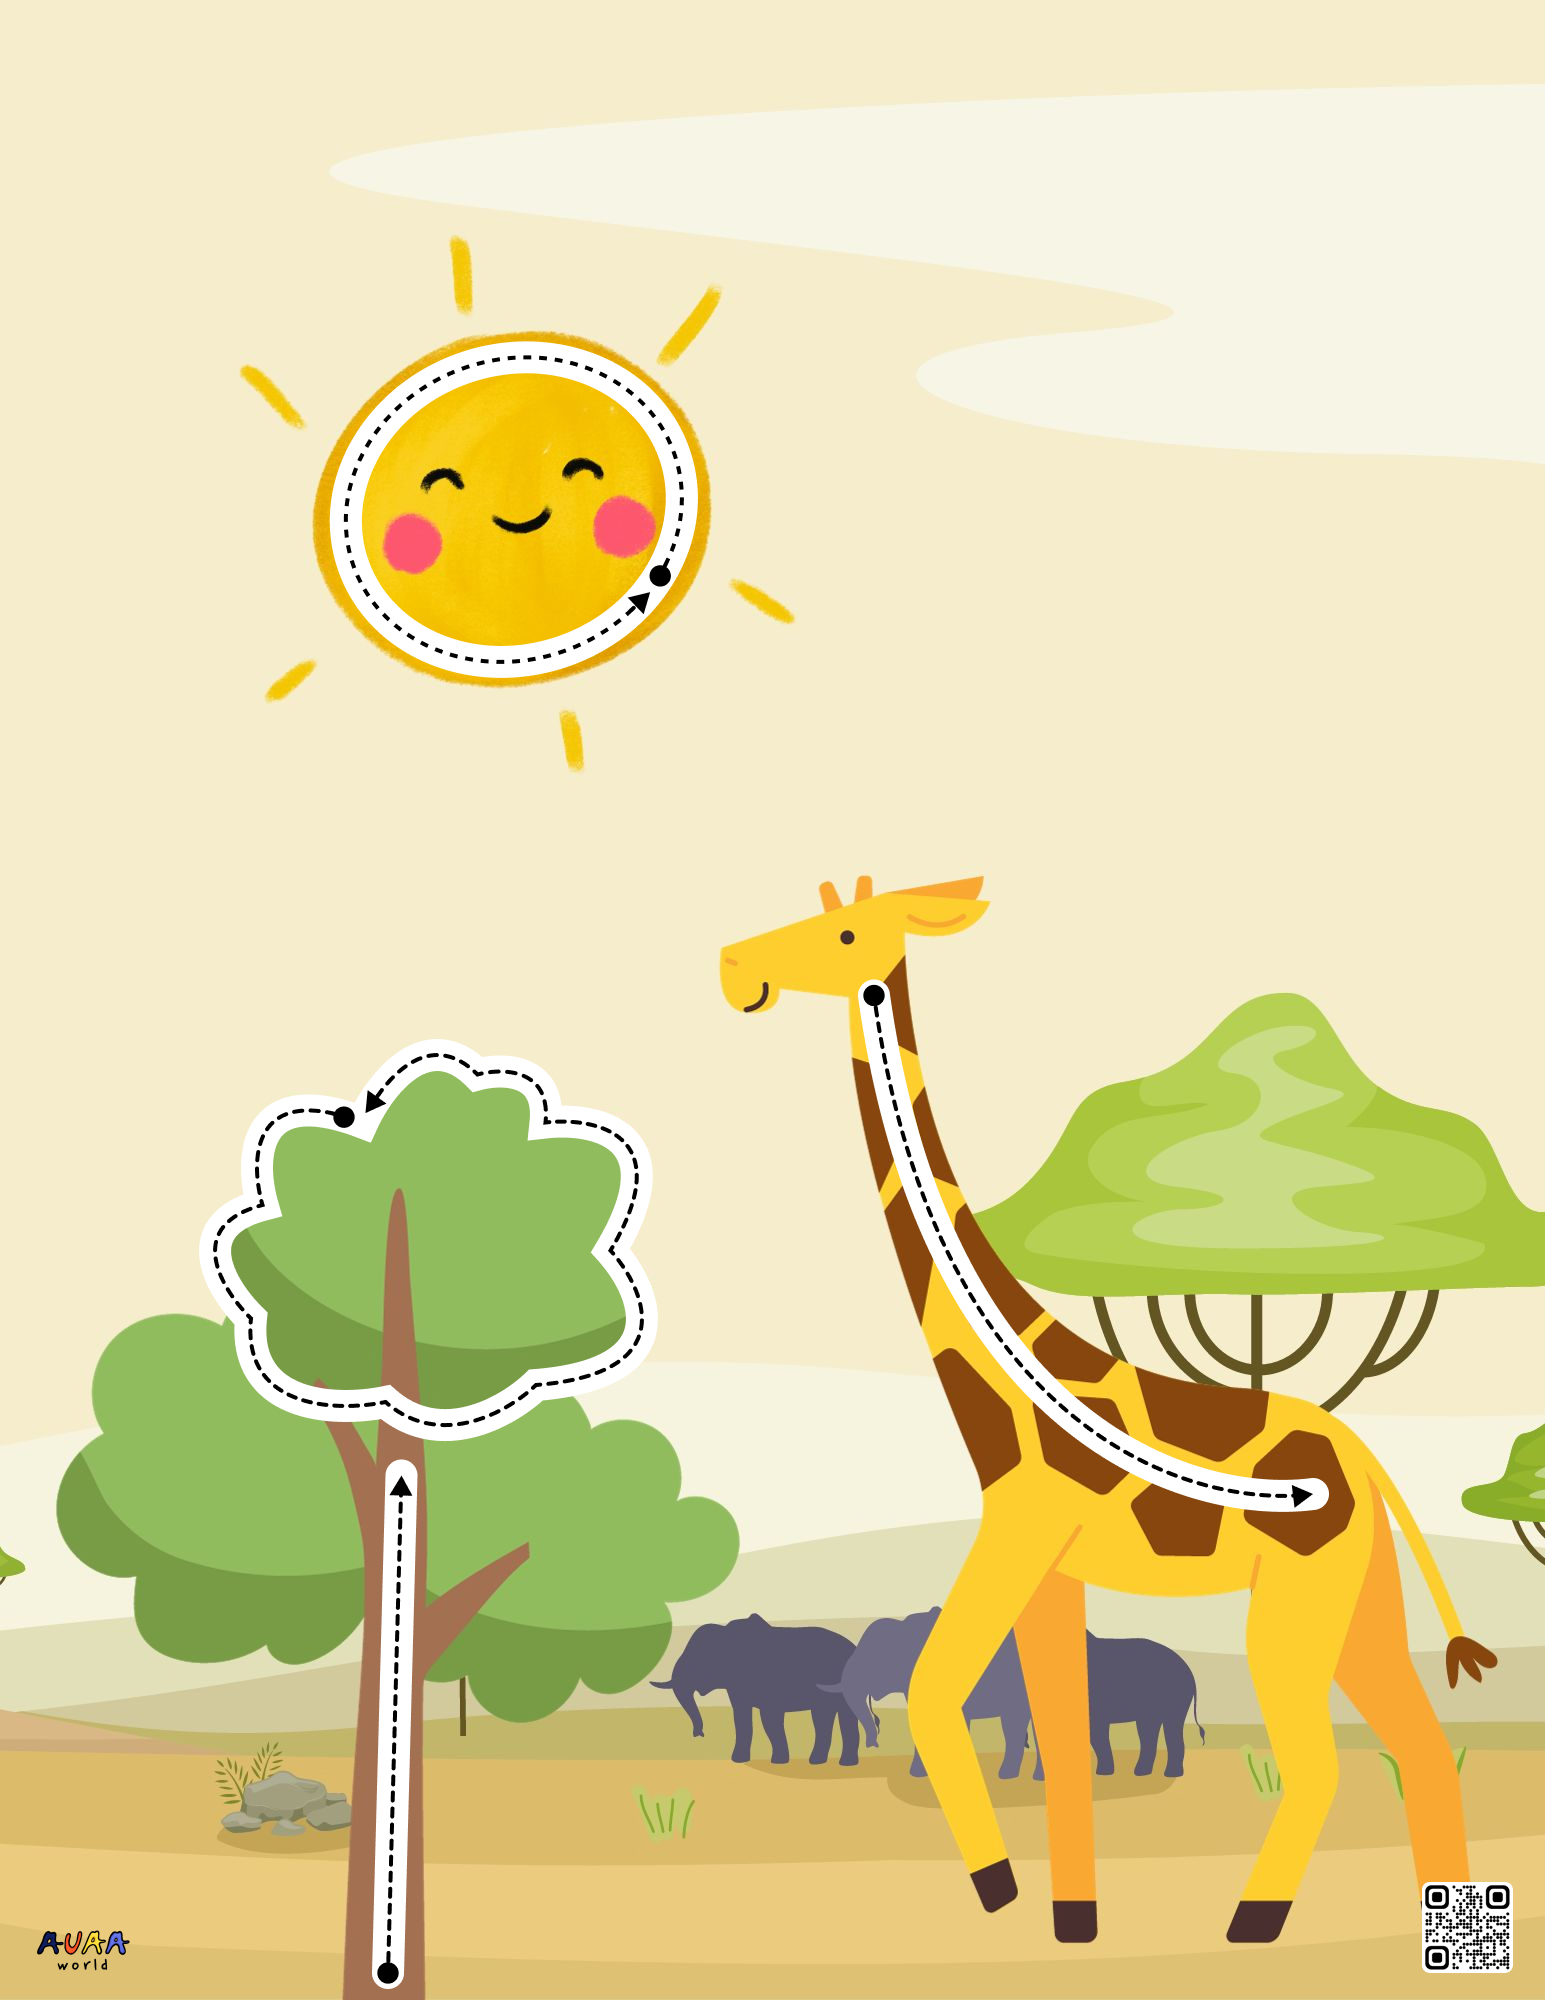 jungle themed pencil control activity pages of sun, tree and giraffe